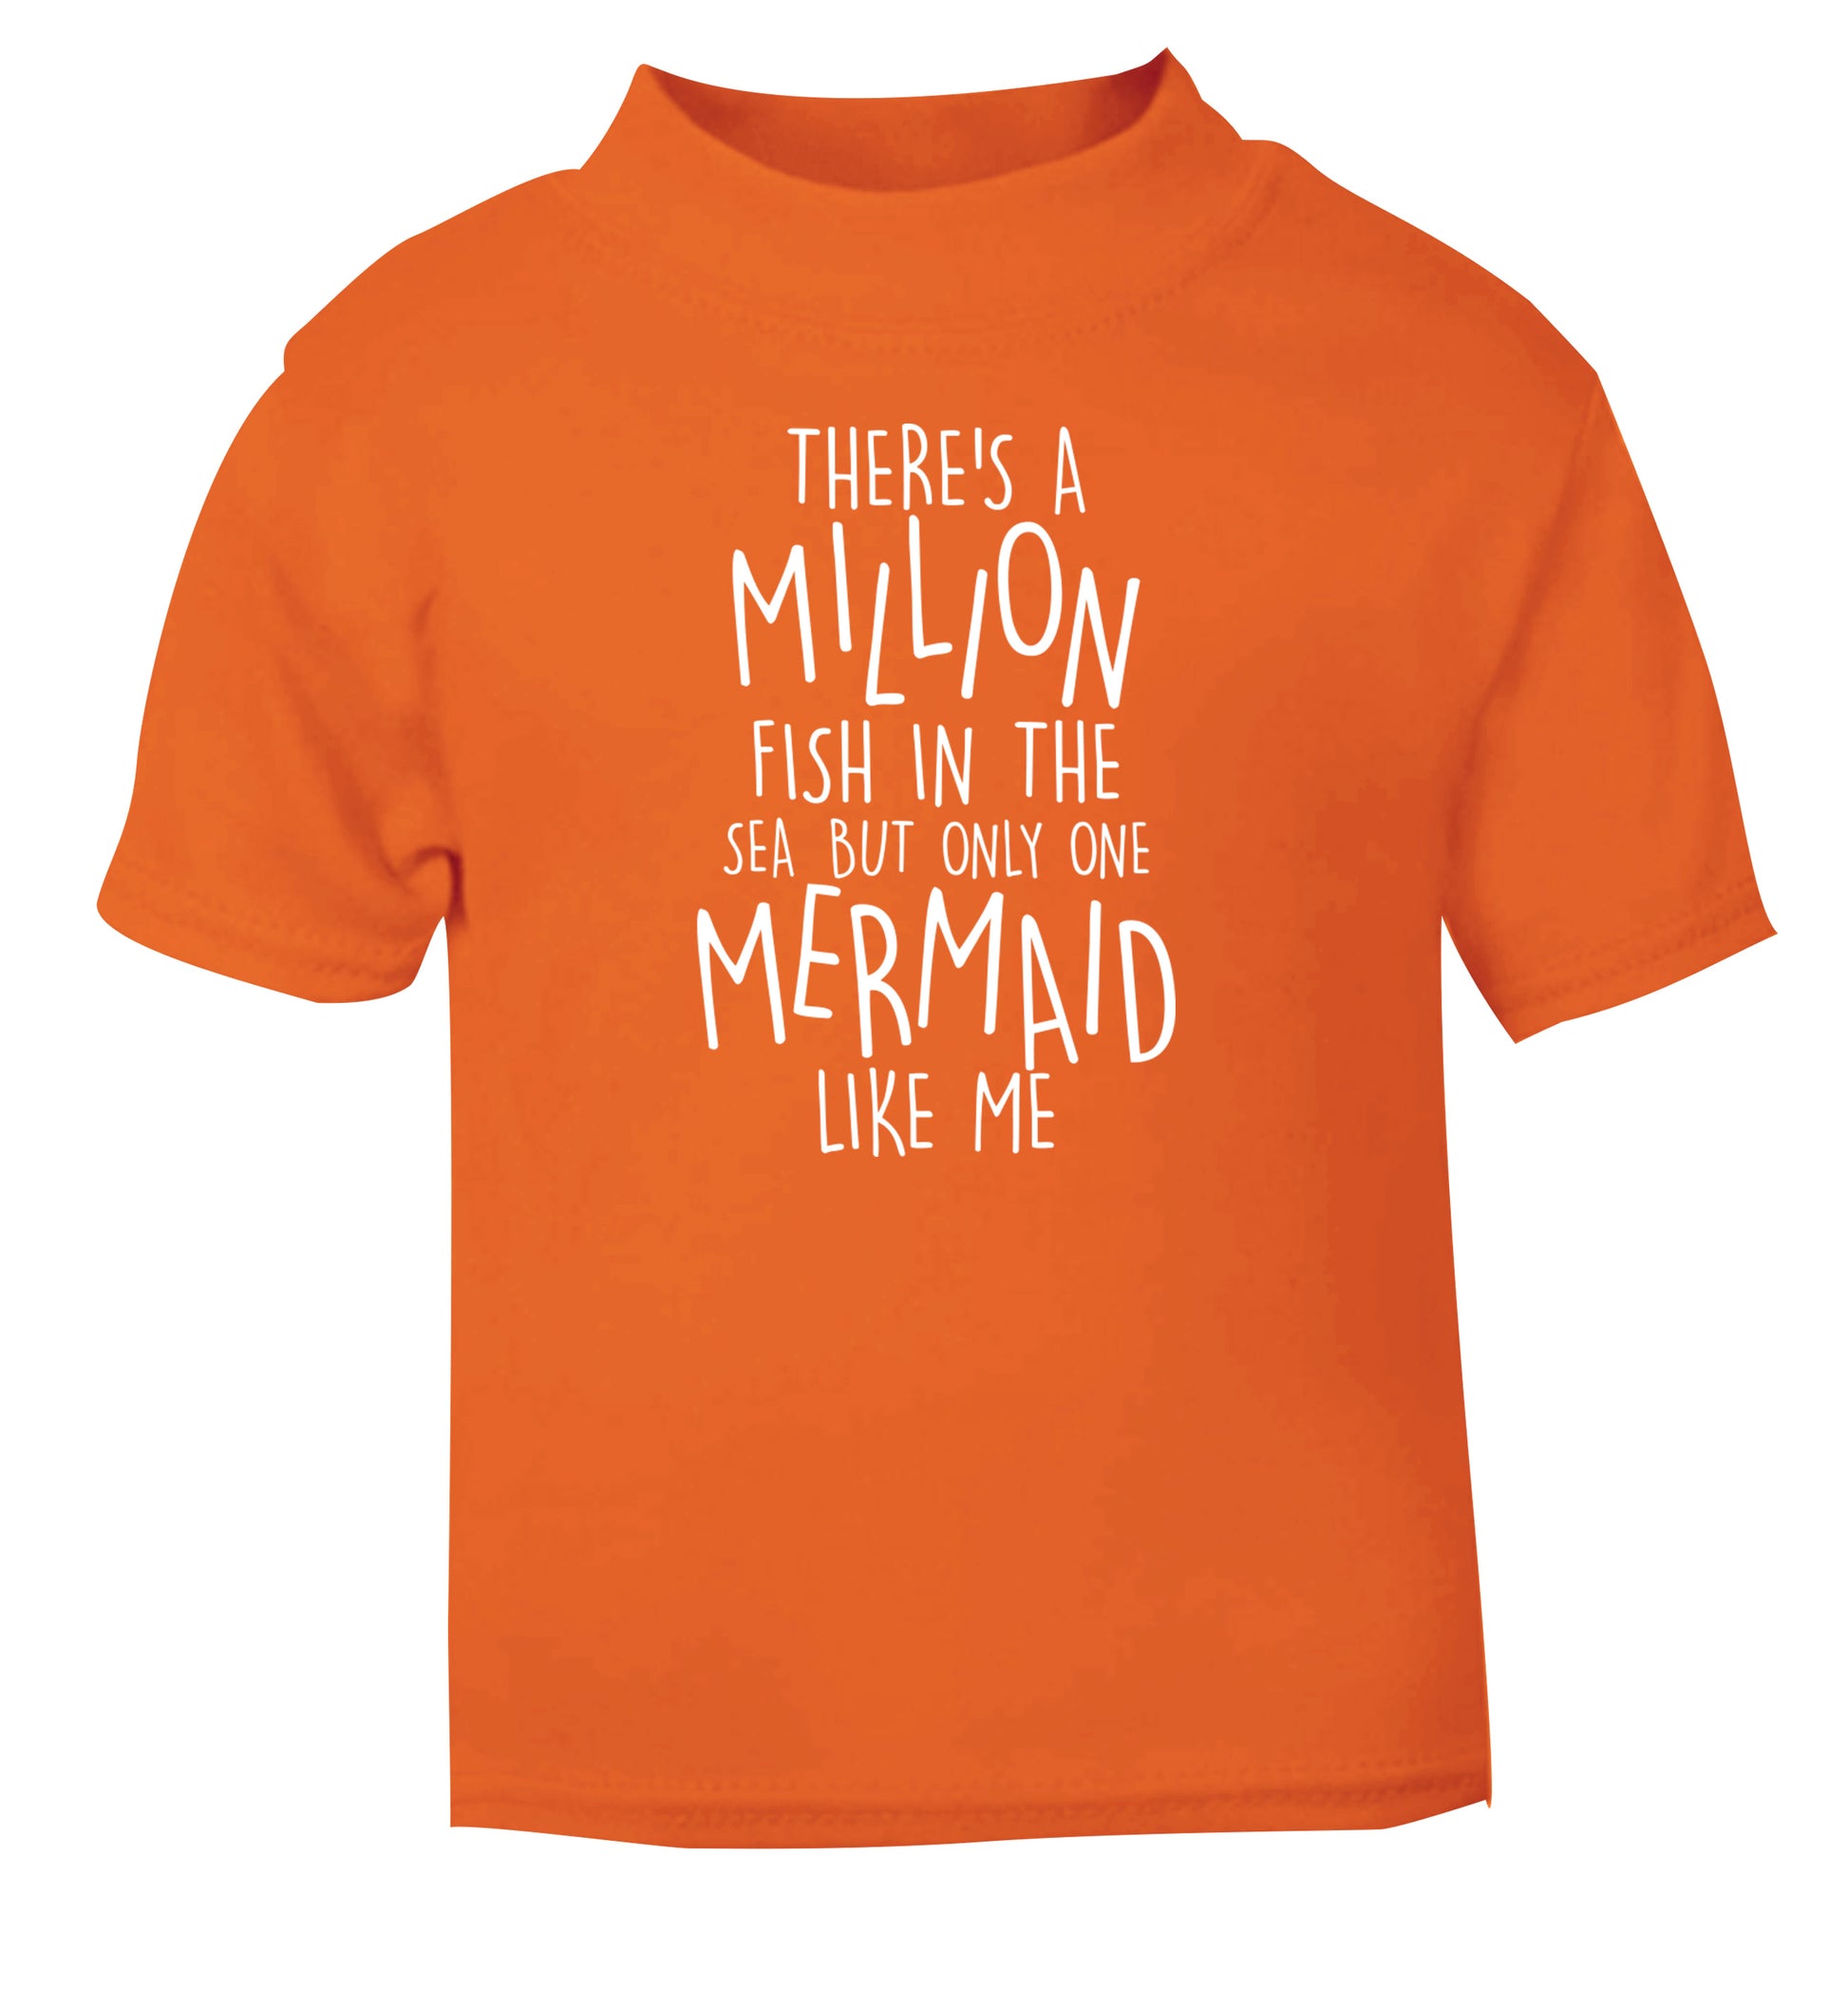 There's a million fish in the sea but only one mermaid like me orange Baby Toddler Tshirt 2 Years